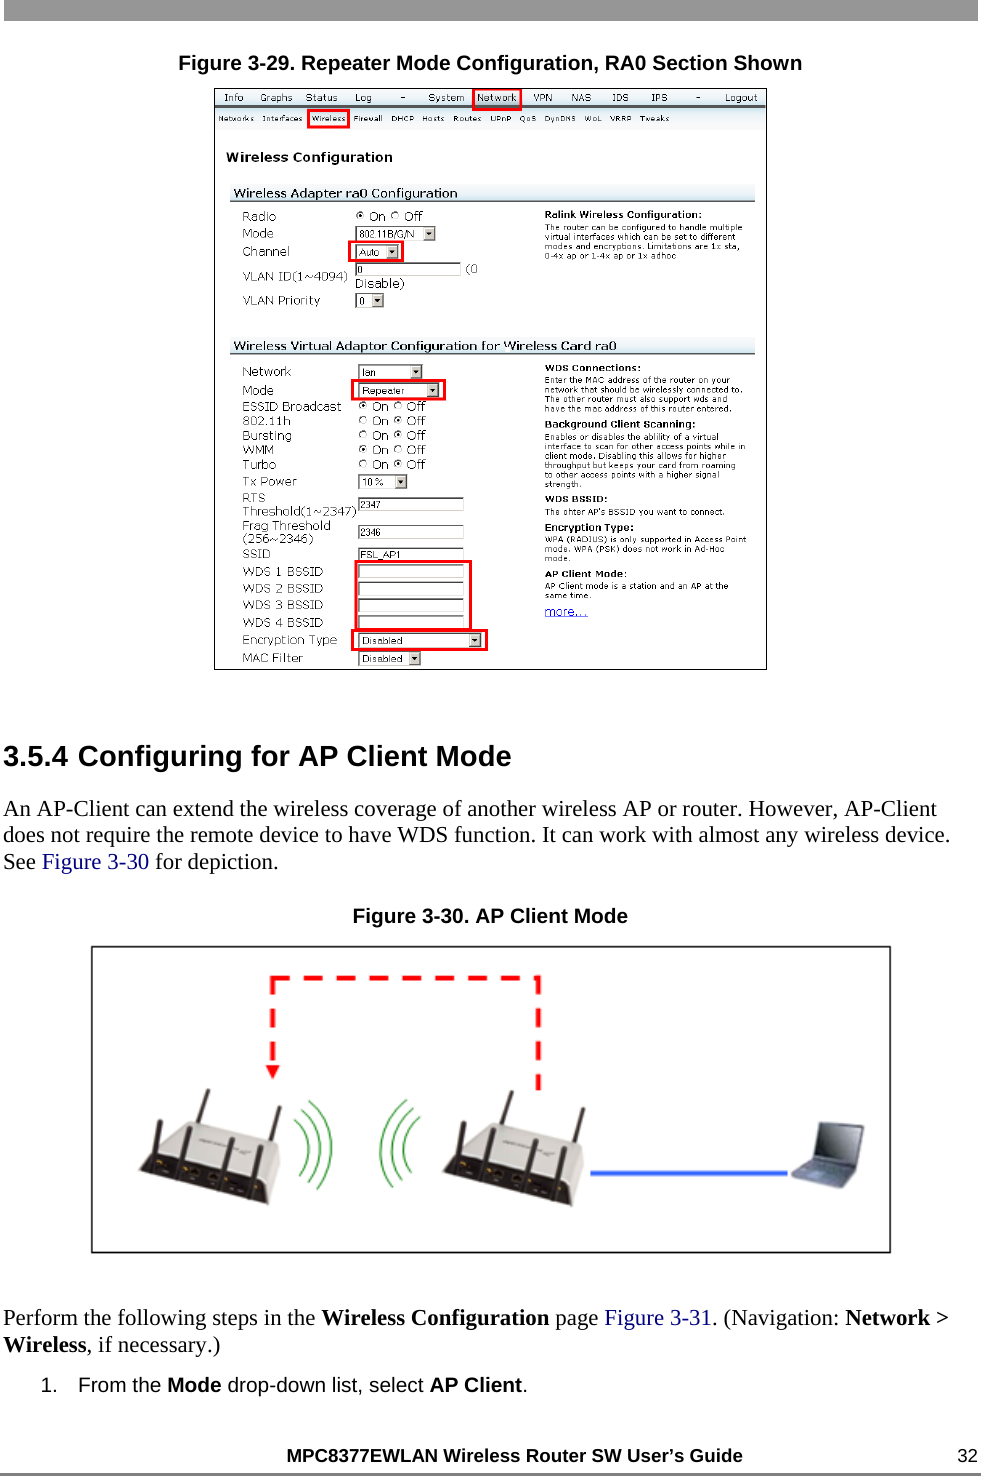                                                          MPC8377EWLAN Wireless Router SW User’s Guide    32 Figure 3-29. Repeater Mode Configuration, RA0 Section Shown  3.5.4 Configuring for AP Client Mode An AP-Client can extend the wireless coverage of another wireless AP or router. However, AP-Client does not require the remote device to have WDS function. It can work with almost any wireless device. See Figure 3-30 for depiction. Figure 3-30. AP Client Mode  Perform the following steps in the Wireless Configuration page Figure 3-31. (Navigation: Network &gt; Wireless, if necessary.) 1. From the Mode drop-down list, select AP Client. 